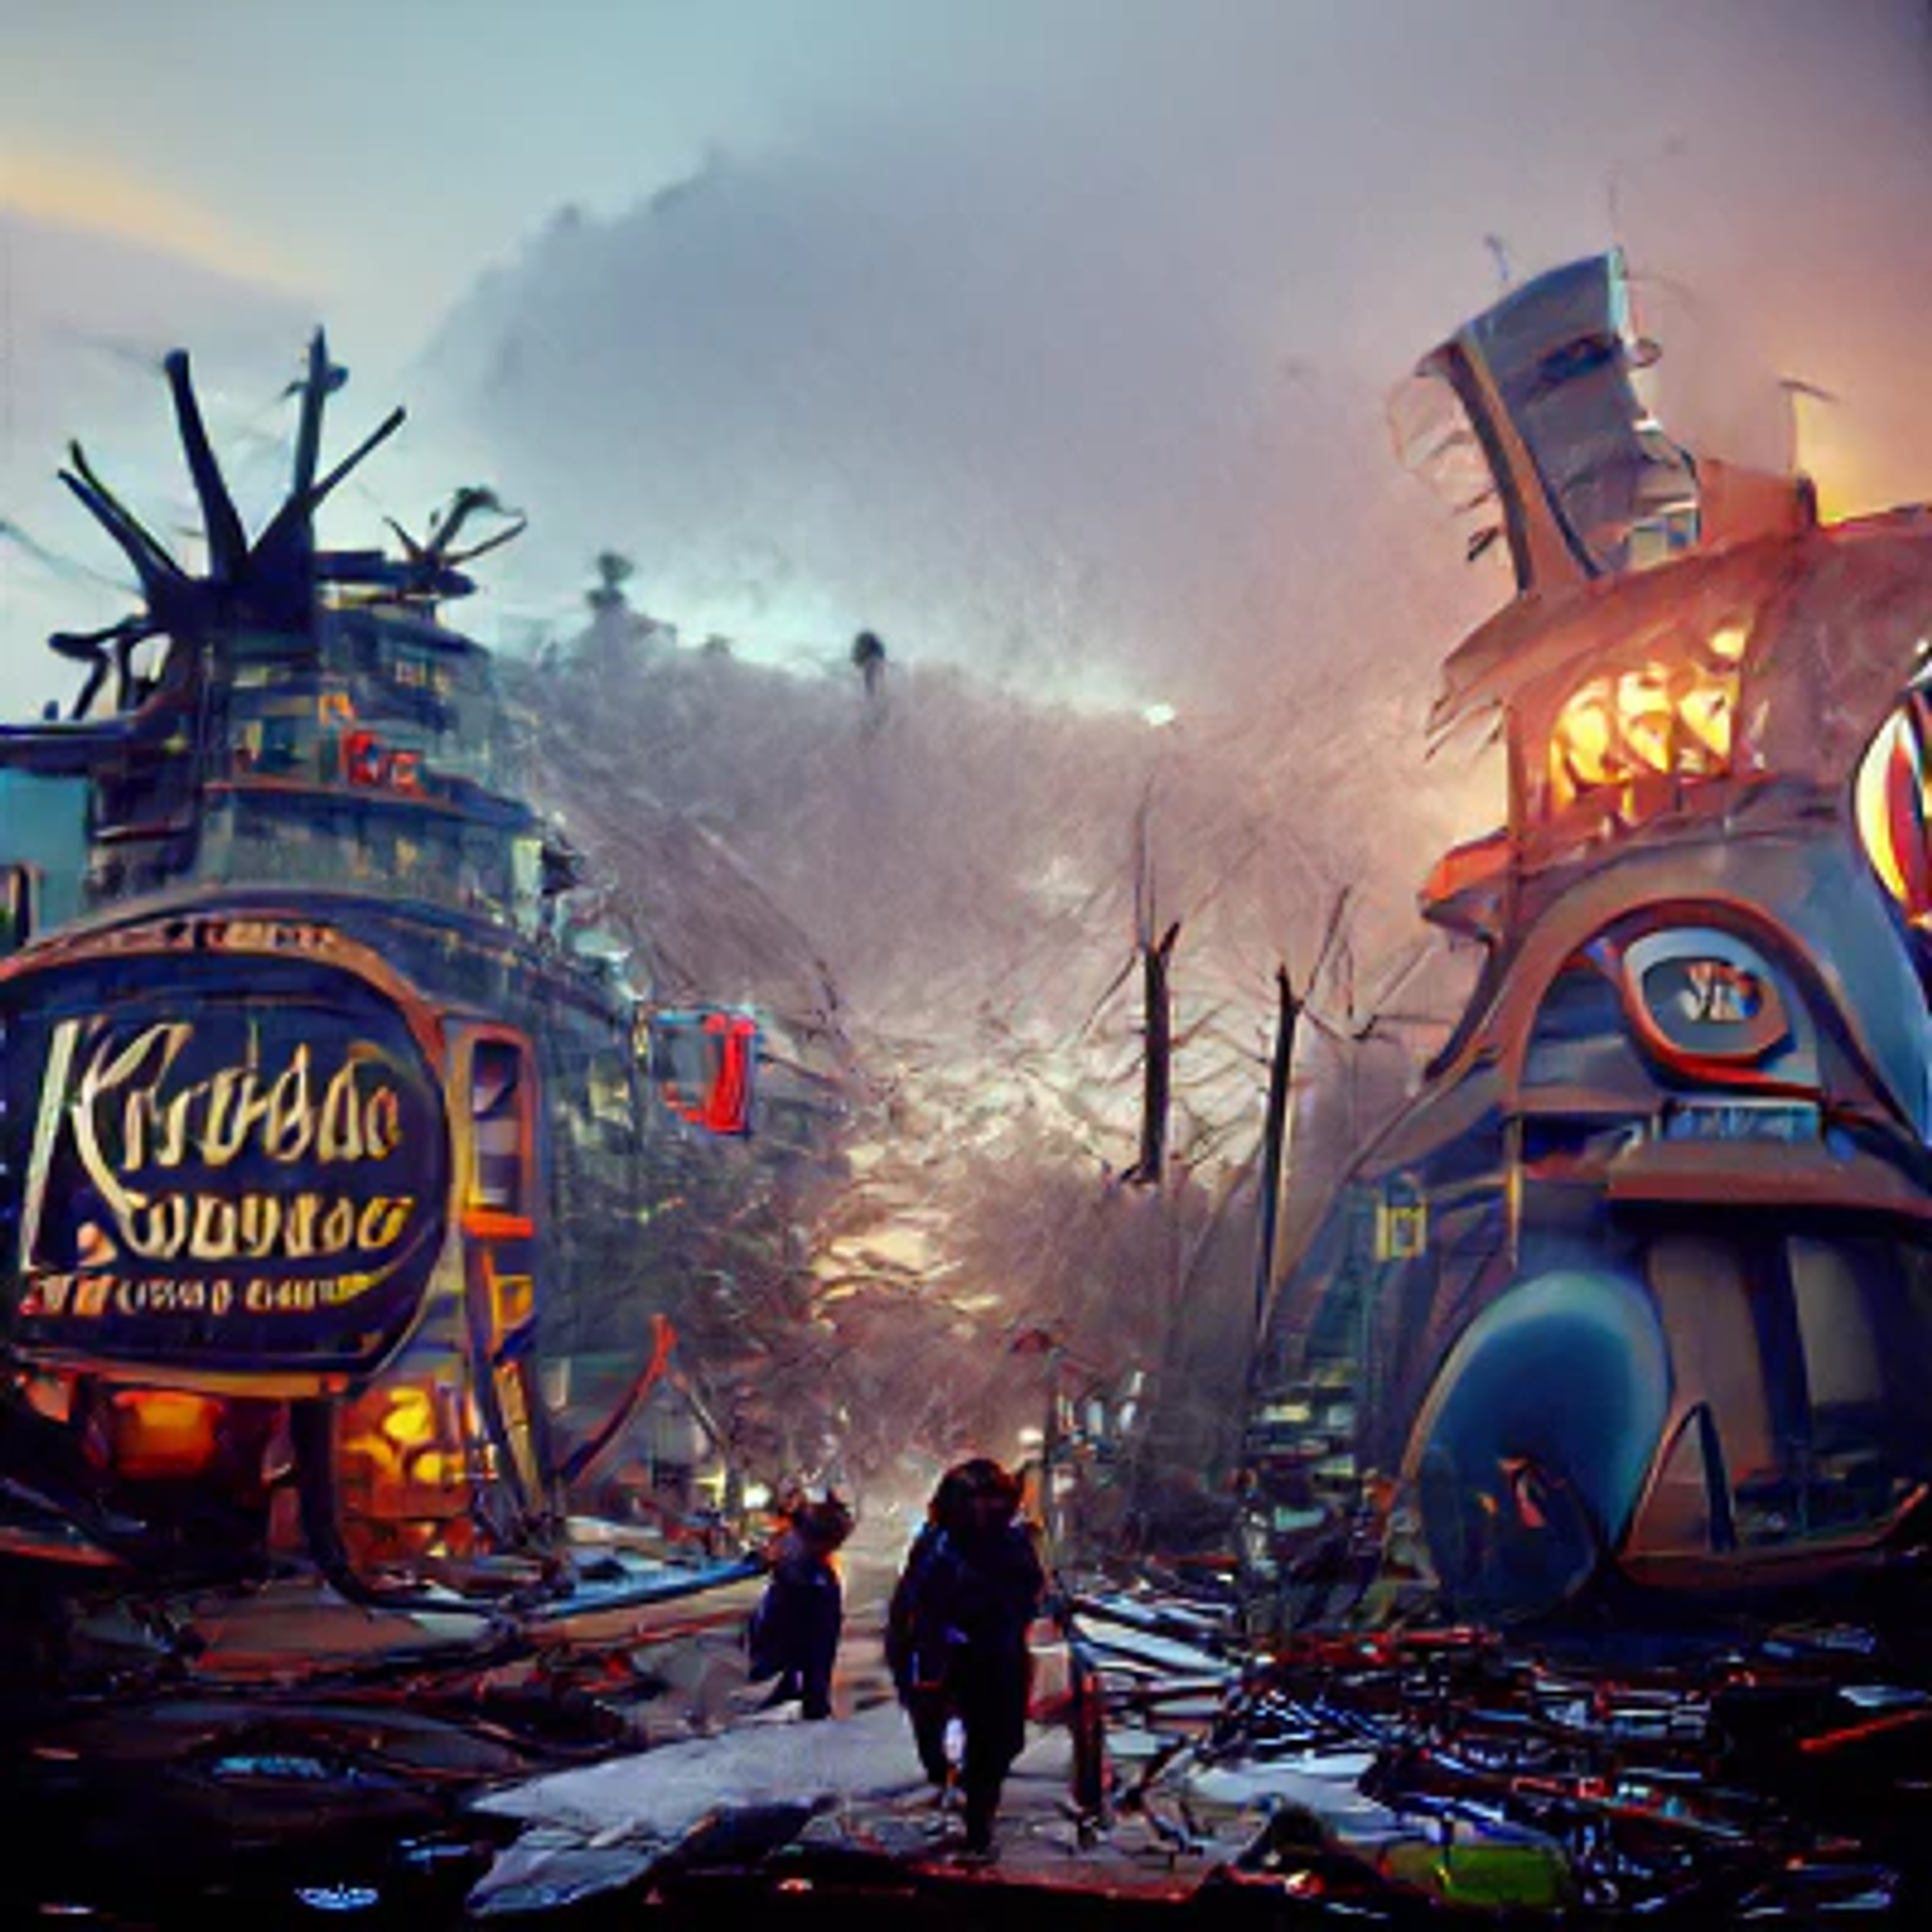 CLIP gives high score to this image and the phrase: "Post-apocalyptic Wonderland"